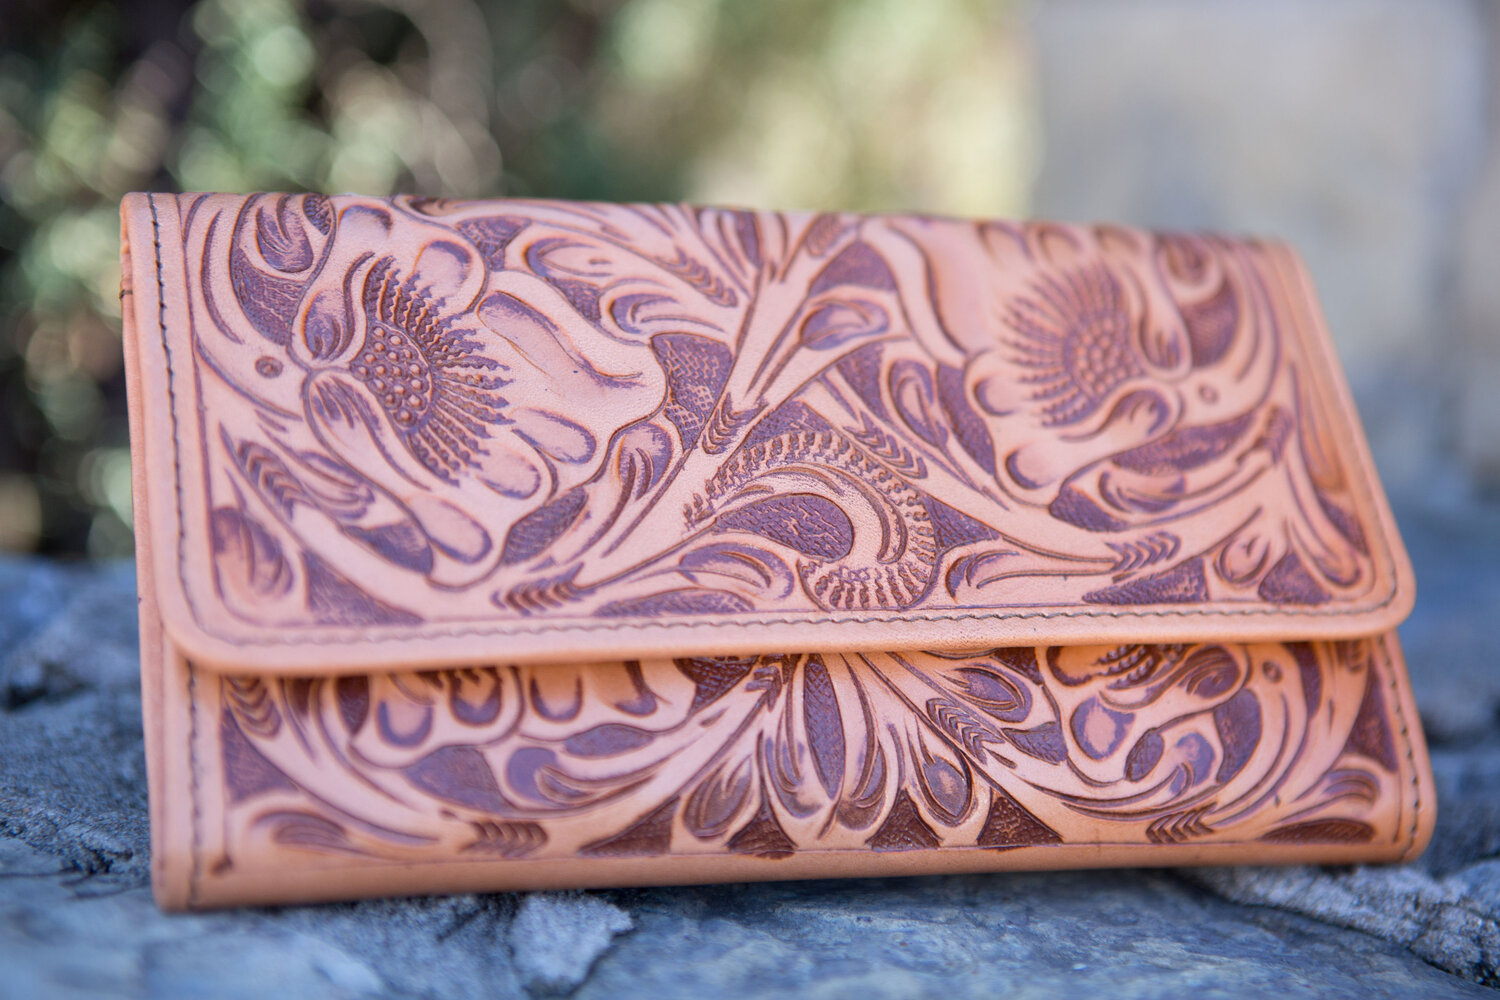 Handmade Leather wallets for women • western wallet woman • tooled